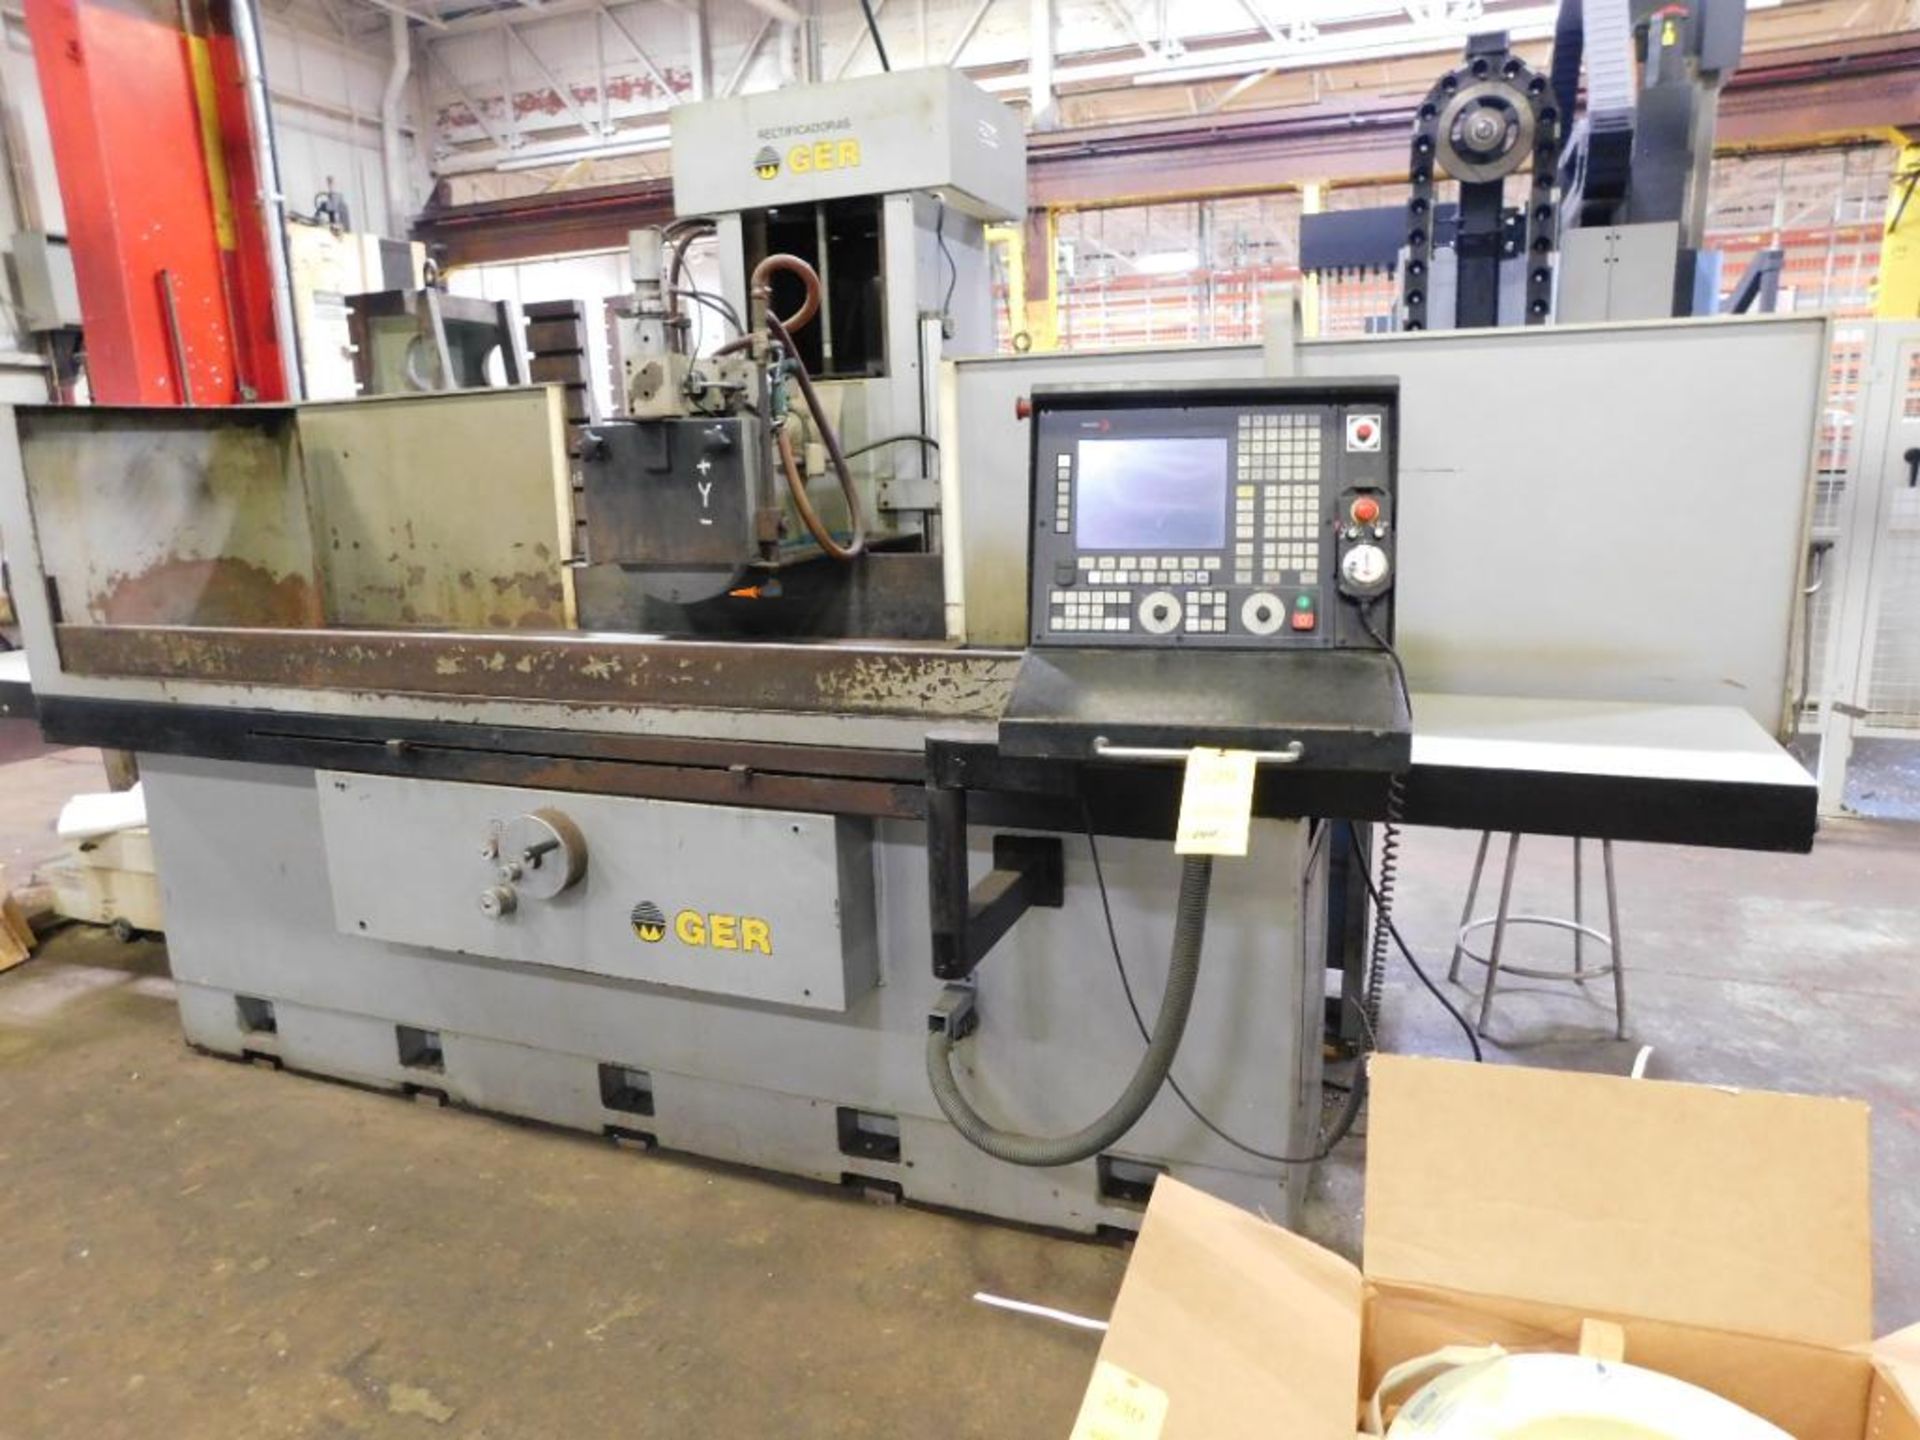 Ger Model RS-15/60 24" x 60" CNC Surface Grinder, S/N: 92/13-50 (1992) ((Unit # 594) w/3-Axis, Elect - Image 2 of 8